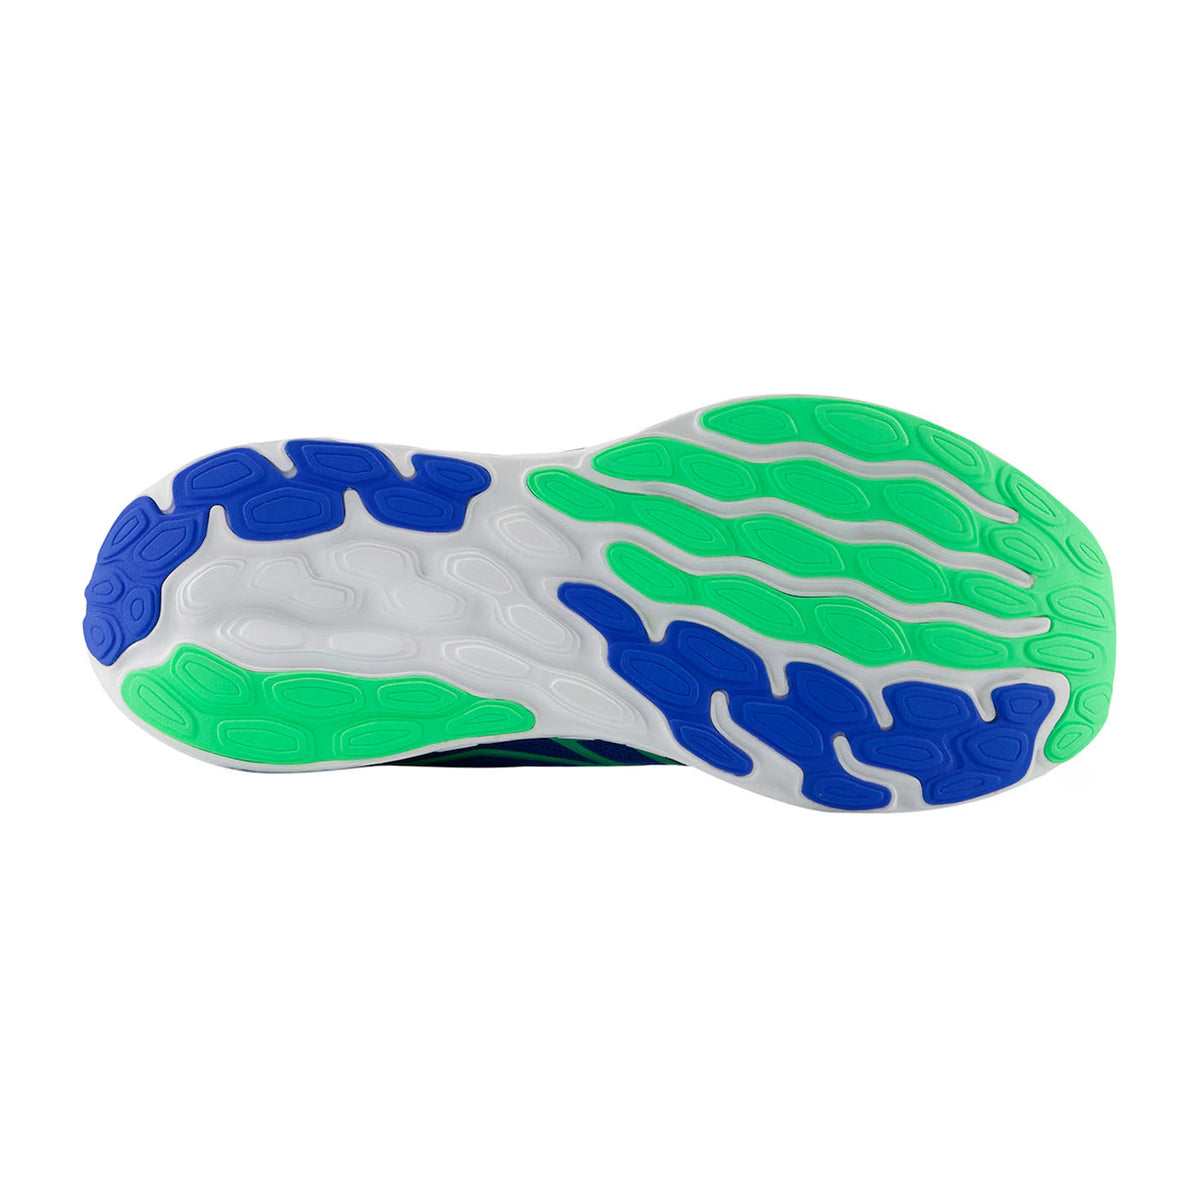 Sole of a lace-up sneaker featuring a white base with blue and neon green traction patterns, isolated on a white background. 
Product Name: New Balance 680v8 Blue Oasis/Lime Leaf/Black/White - Mens